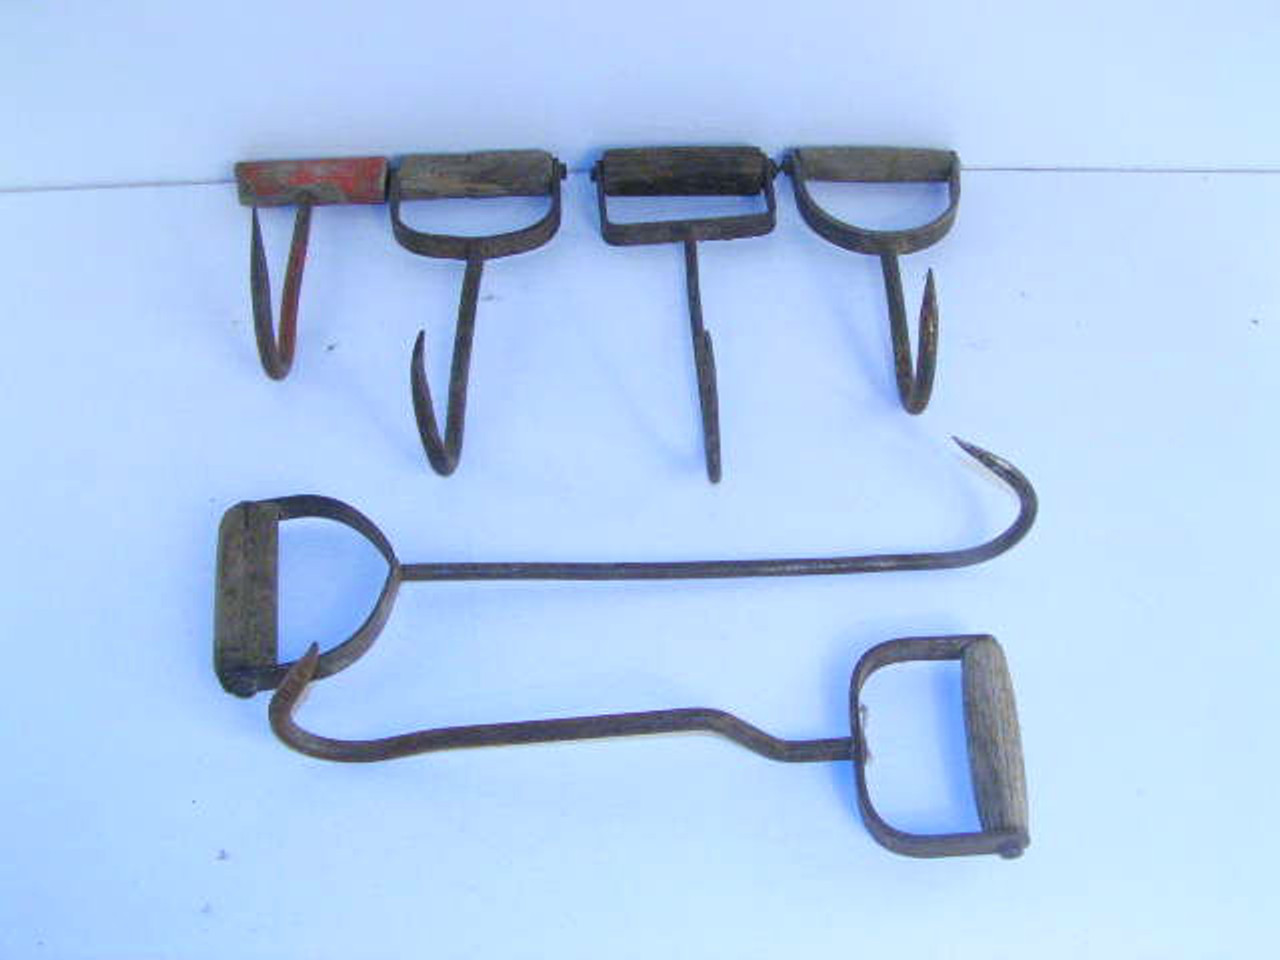 These are examples of the old hay hooks with wooden handles used on the  farm we have in stock.